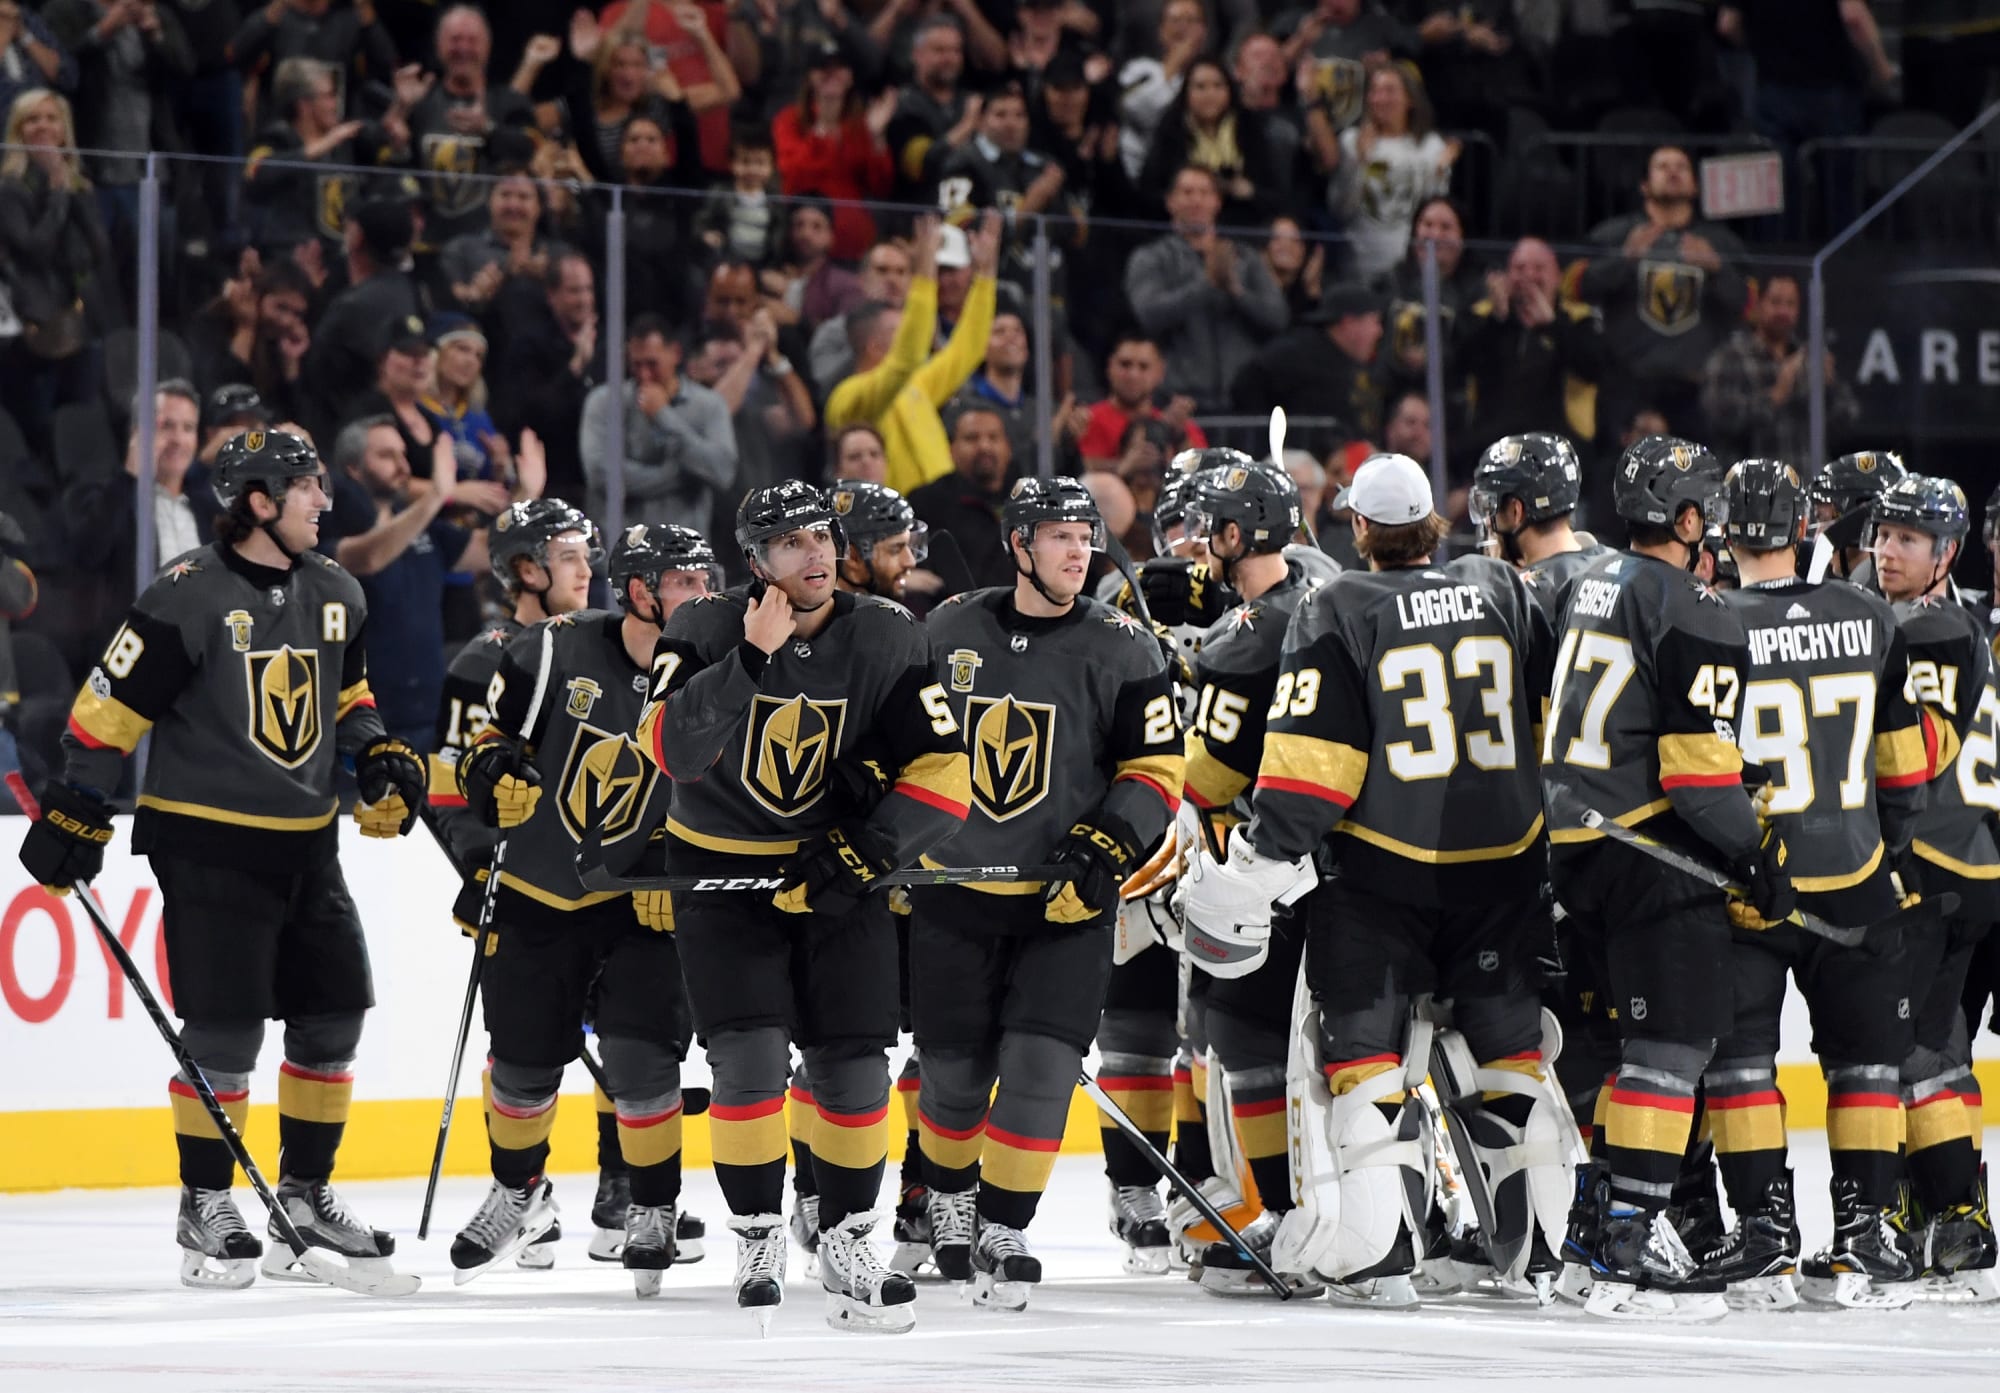 Golden Knights win Stanley Cup, cementing Vegas as sports city